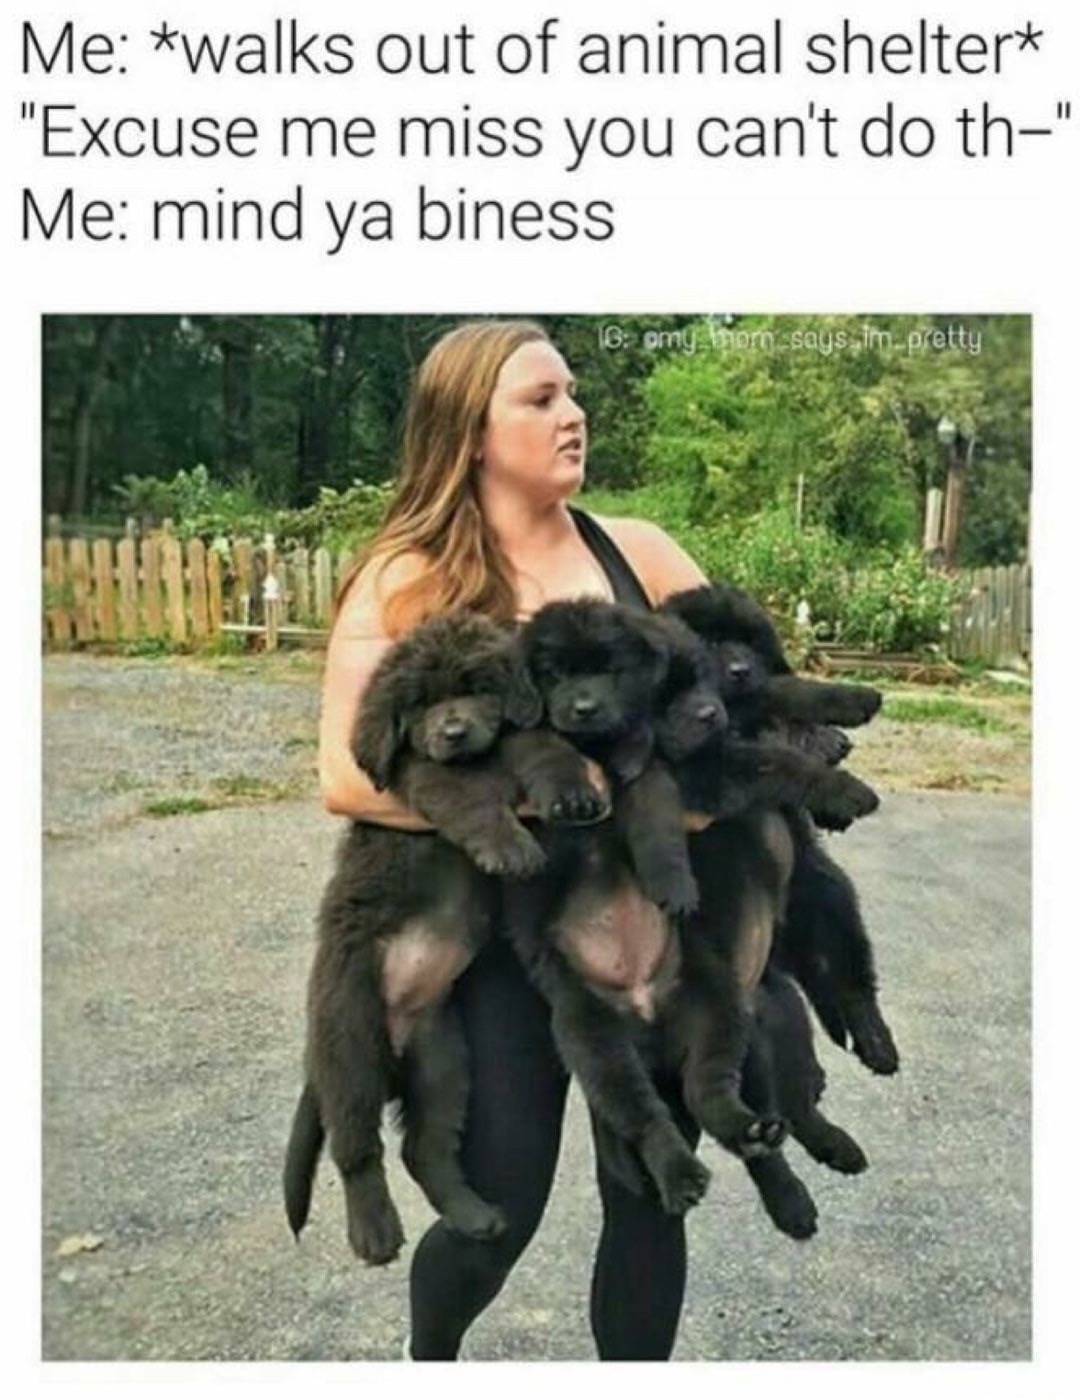 dank meme funny dog lover memes - Me walks out of animal shelter "Excuse me miss you can't do th" Me mind ya biness 16omy bromsays im. pretty